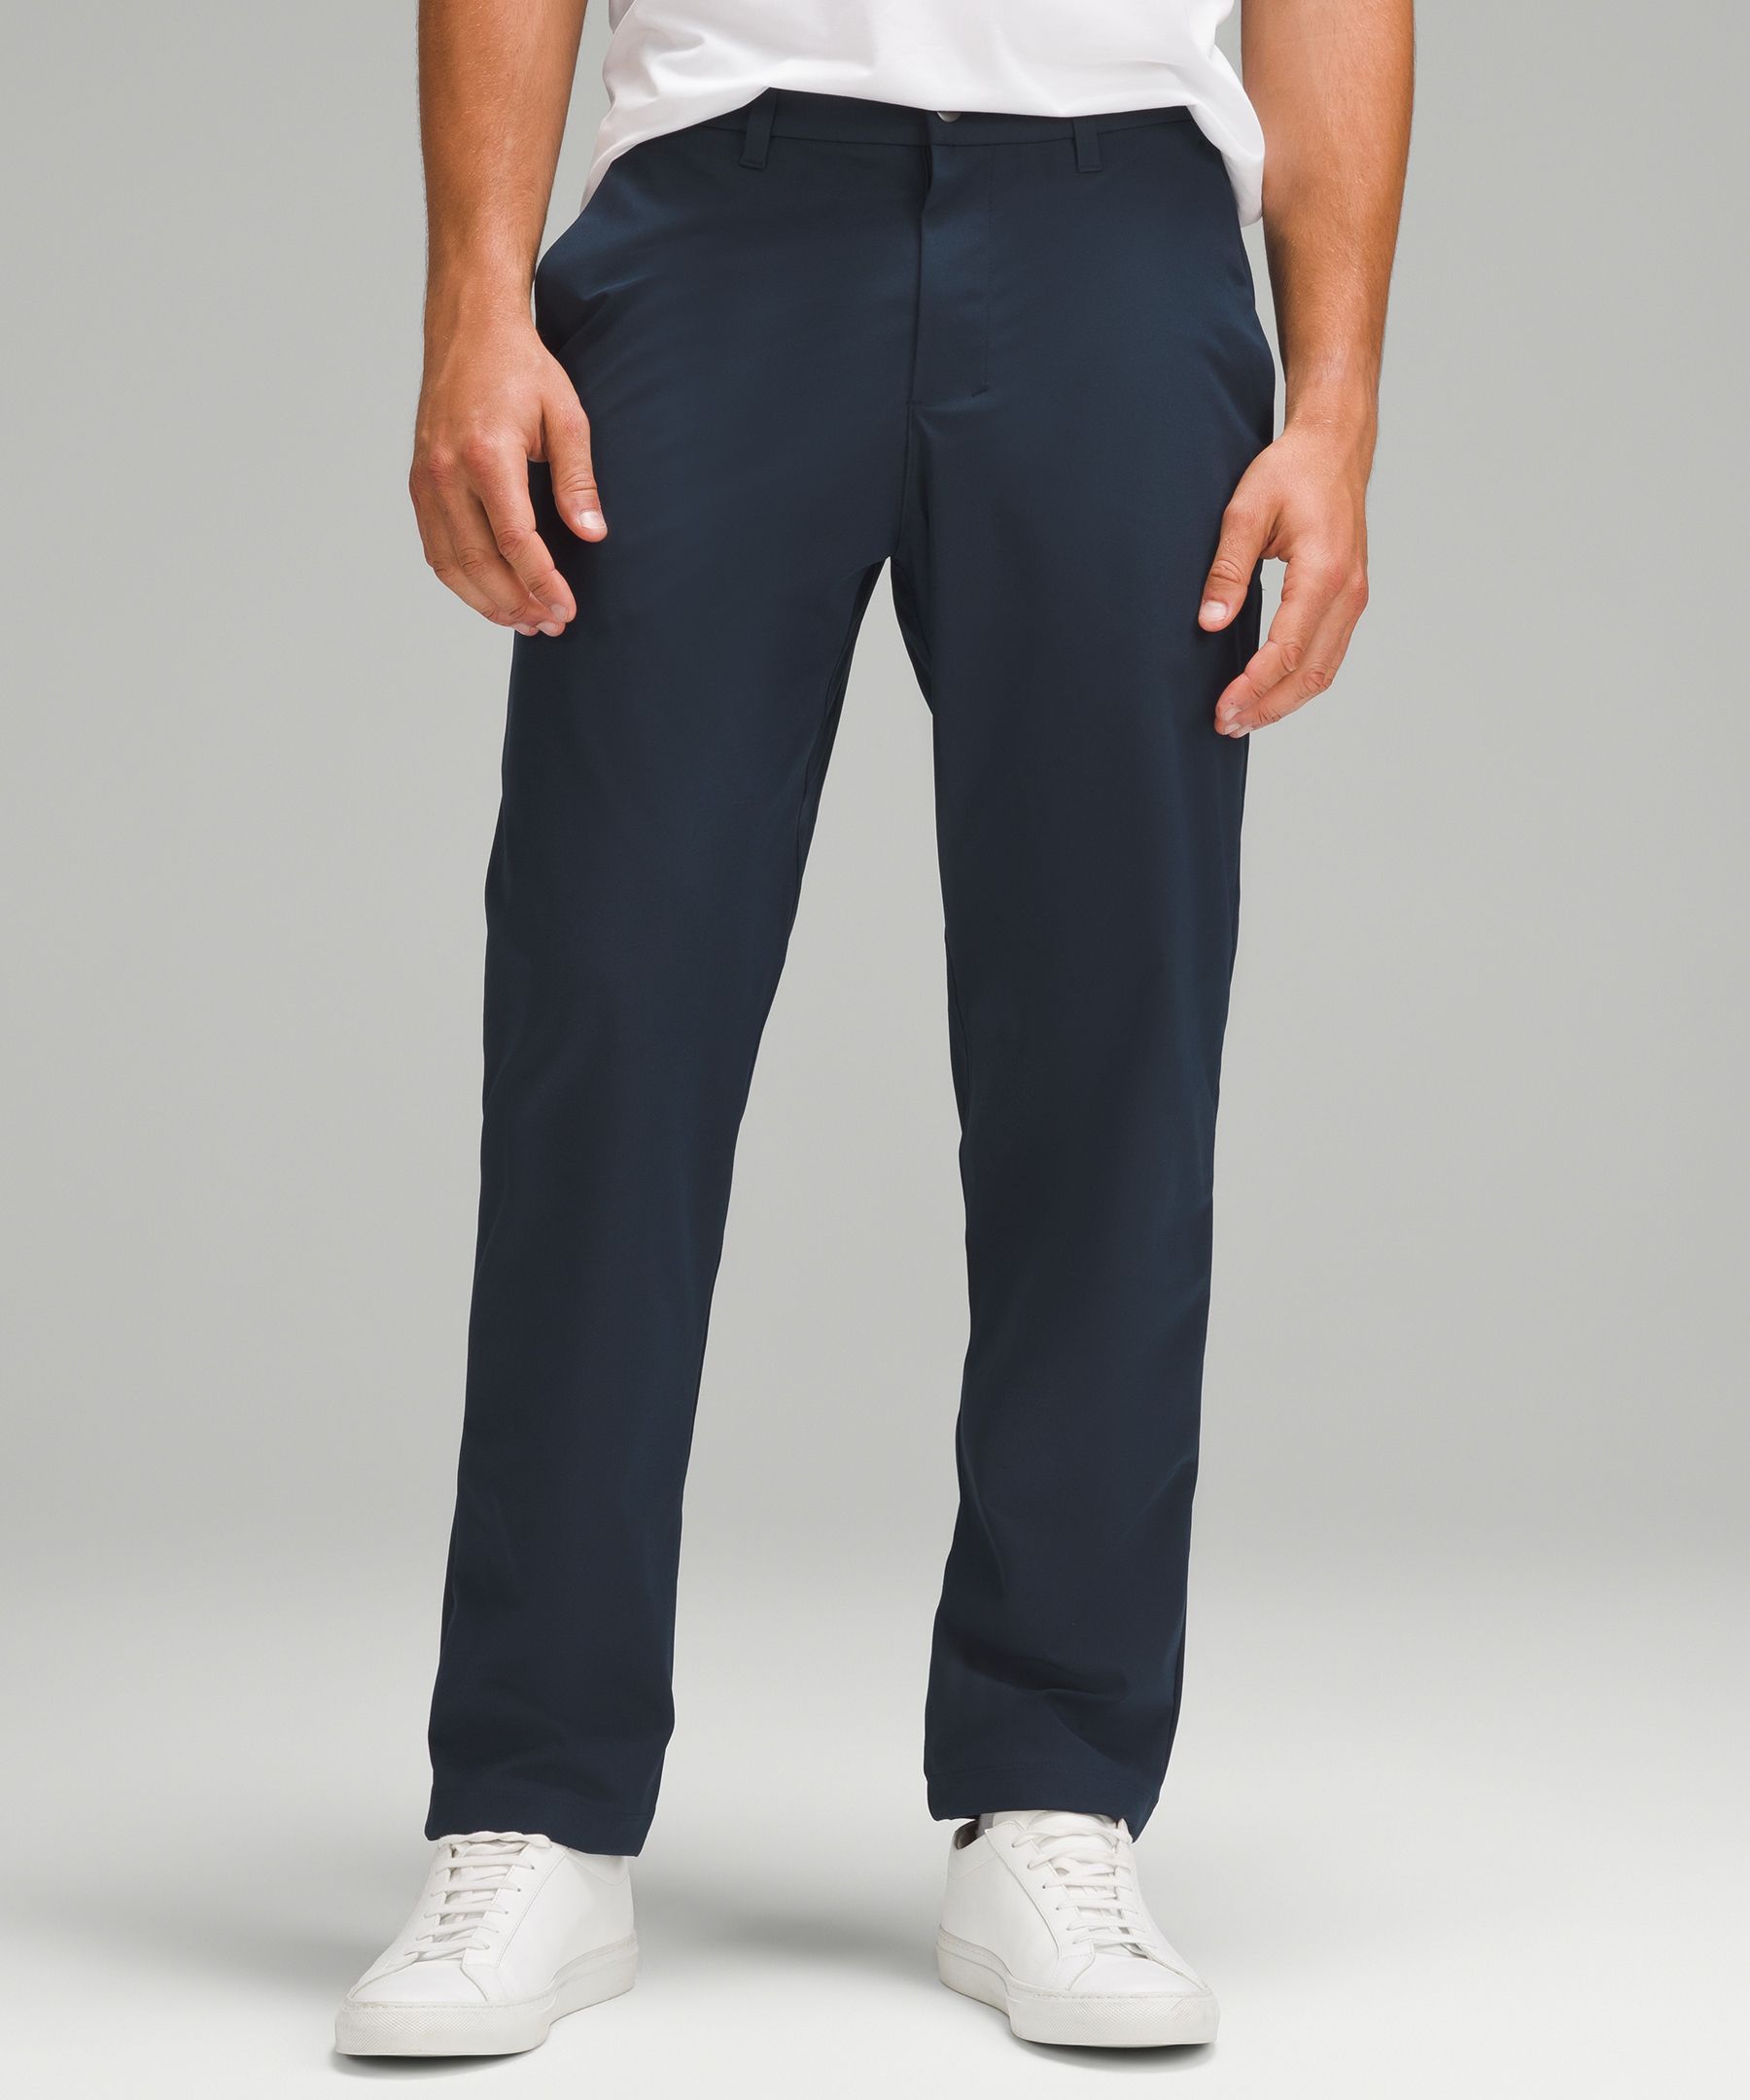 Lululemon Abc Relaxed-fit Trousers 32"l Warpstreme